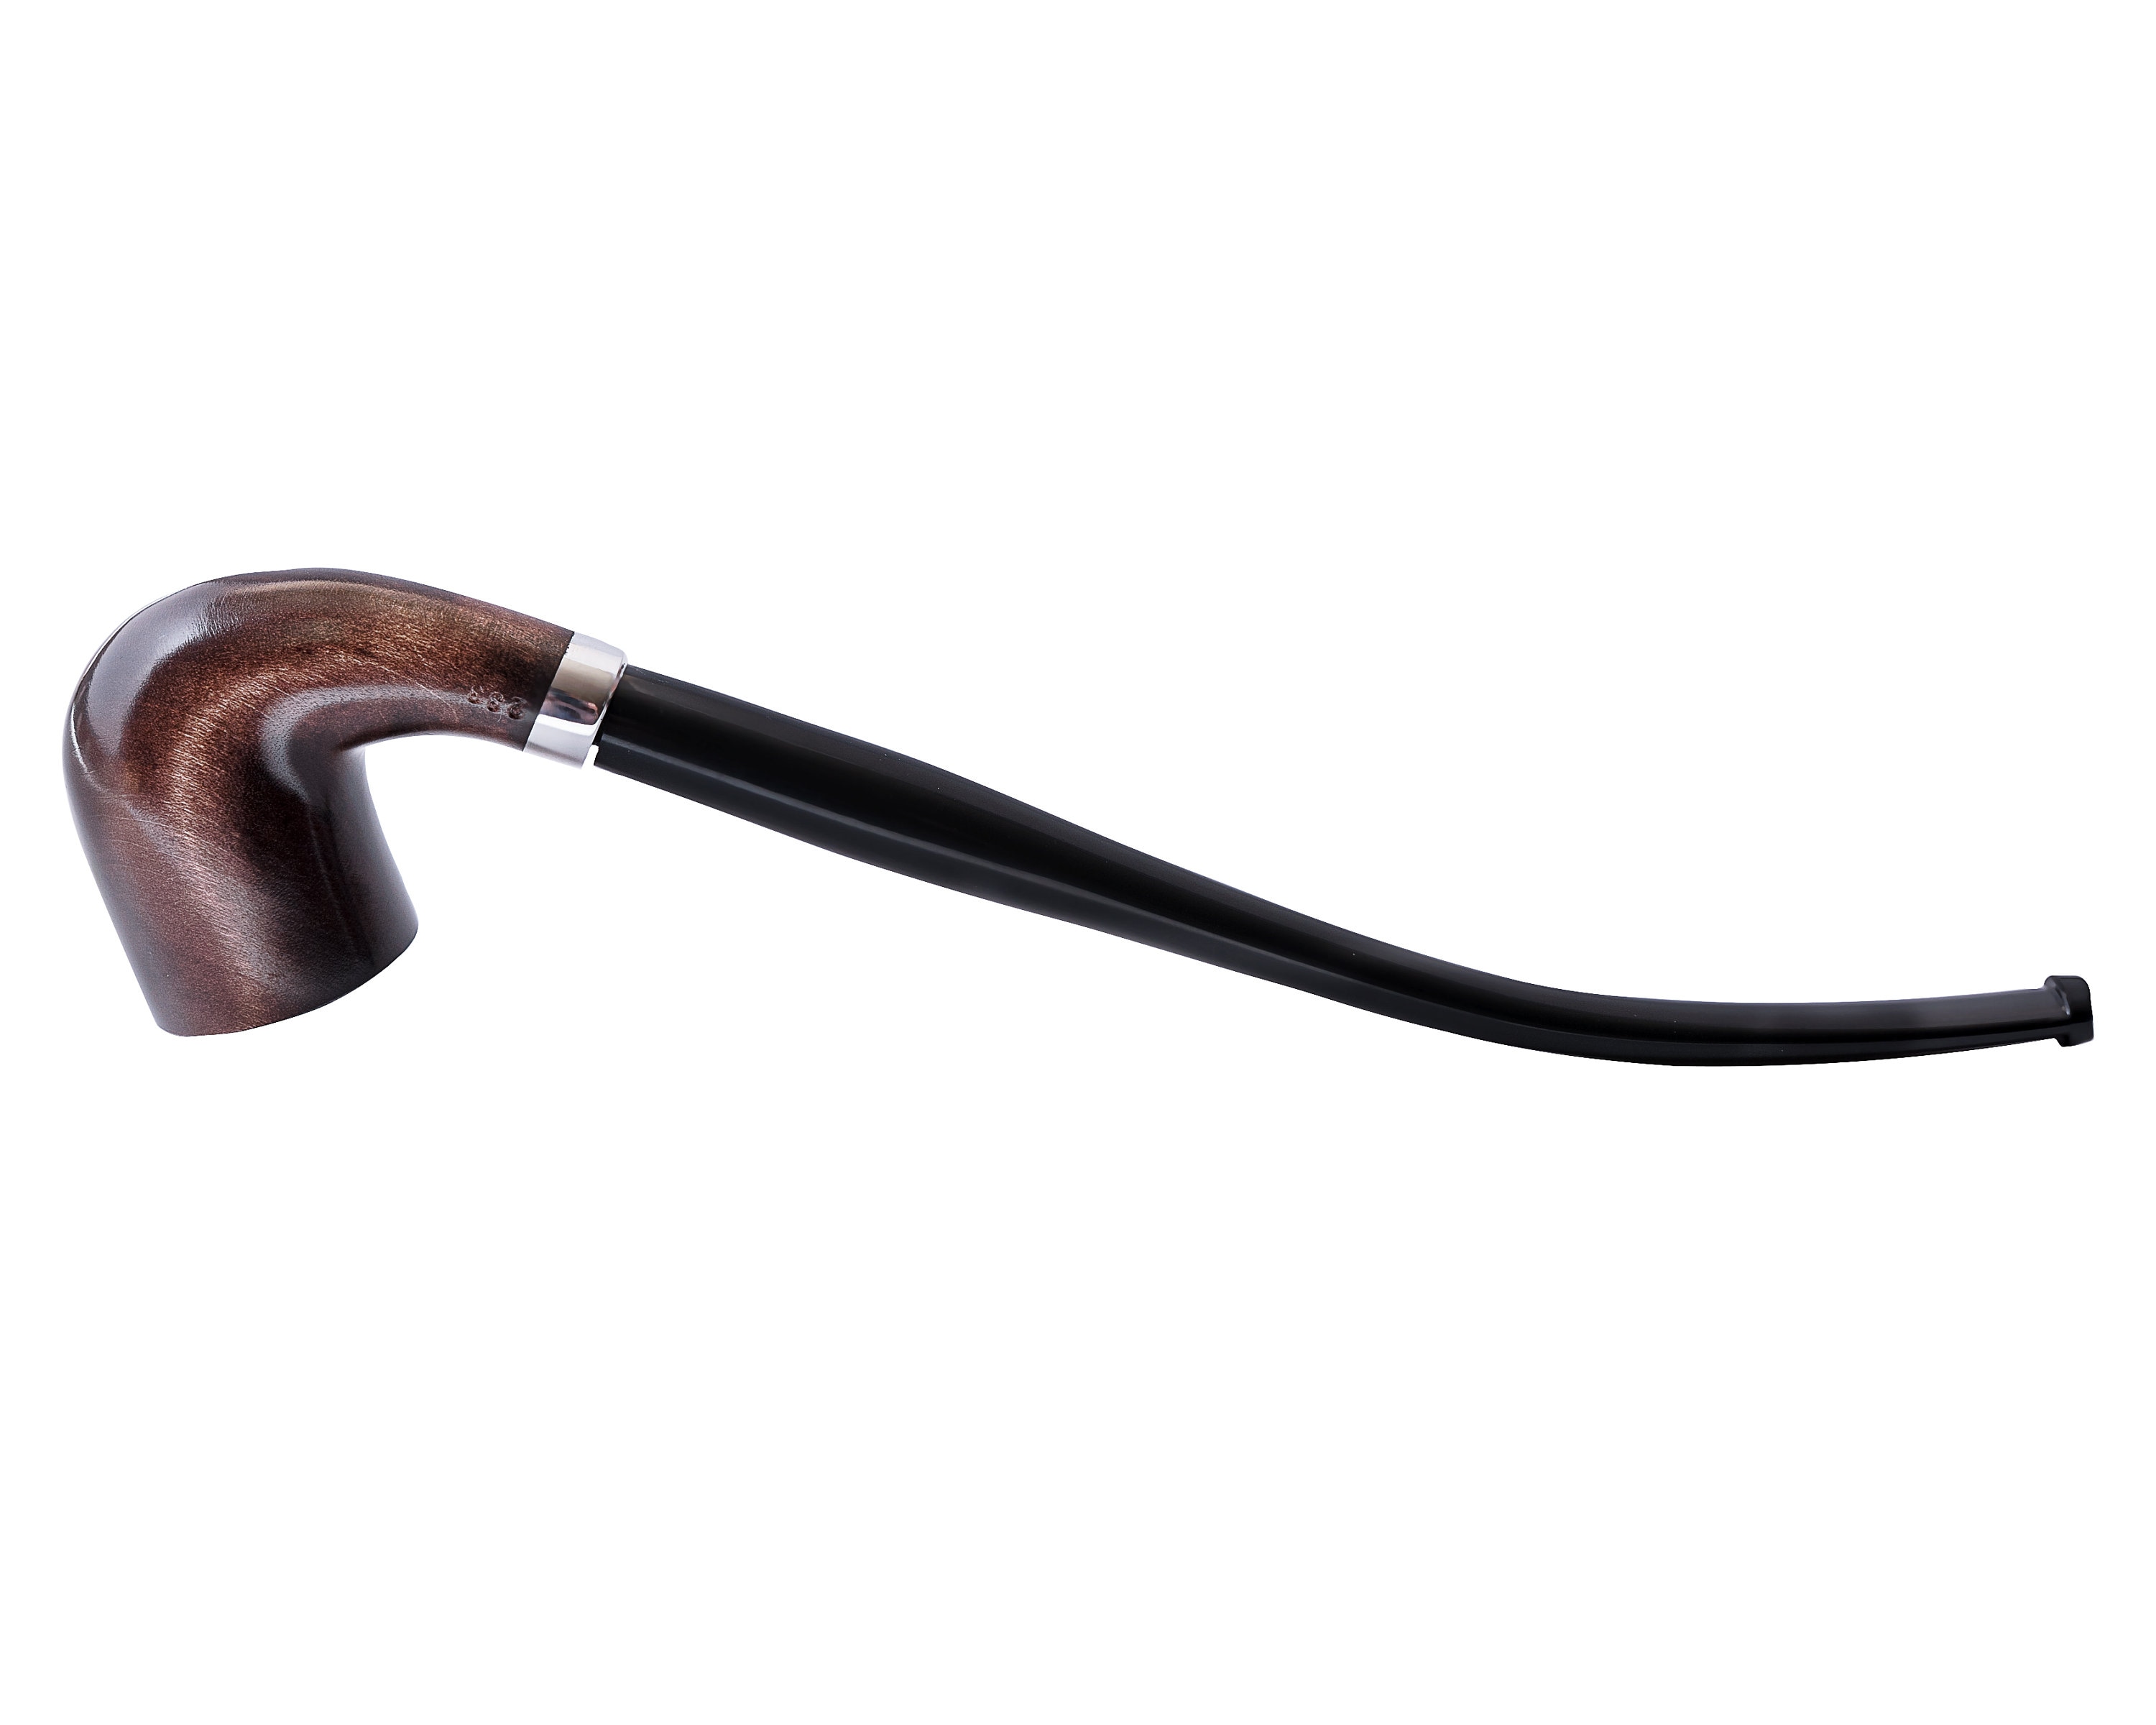 Tobacco Smoking Set Long Stem Churchwarden Pipe With Wooden Tamper / Best  Gift for Man Smoker -  Norway